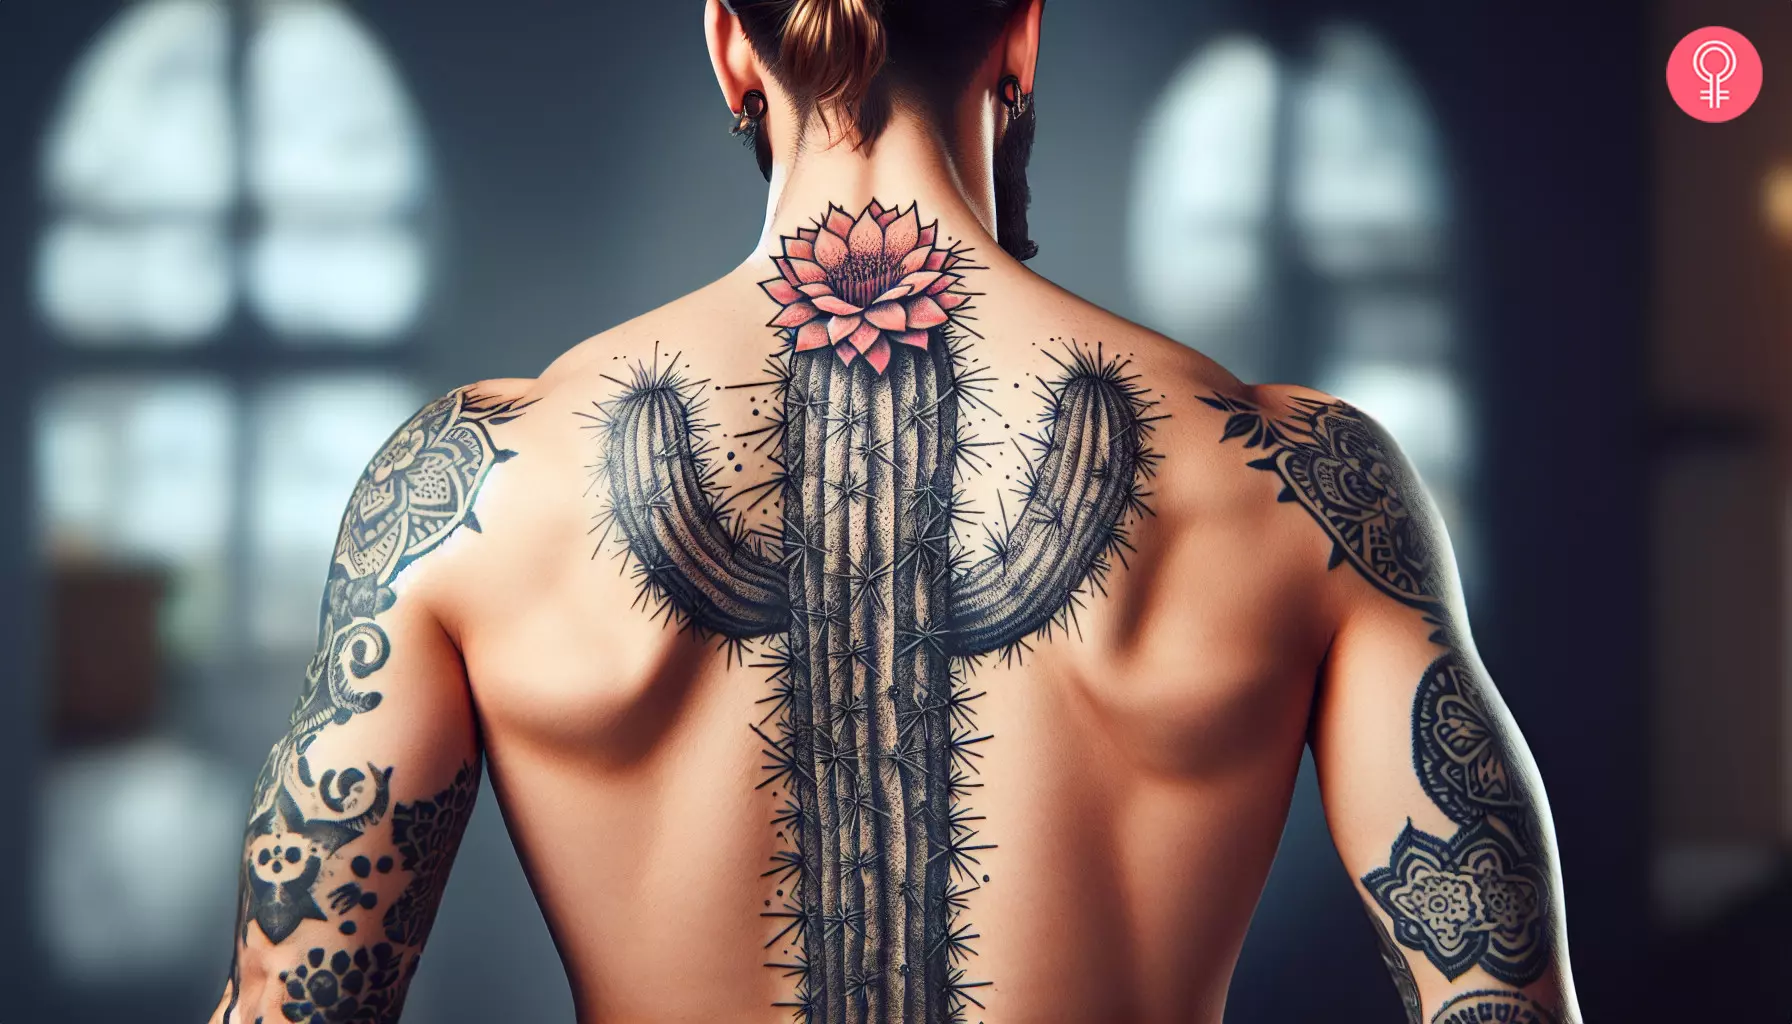 Western spine tattoo featuring a flowering cactus